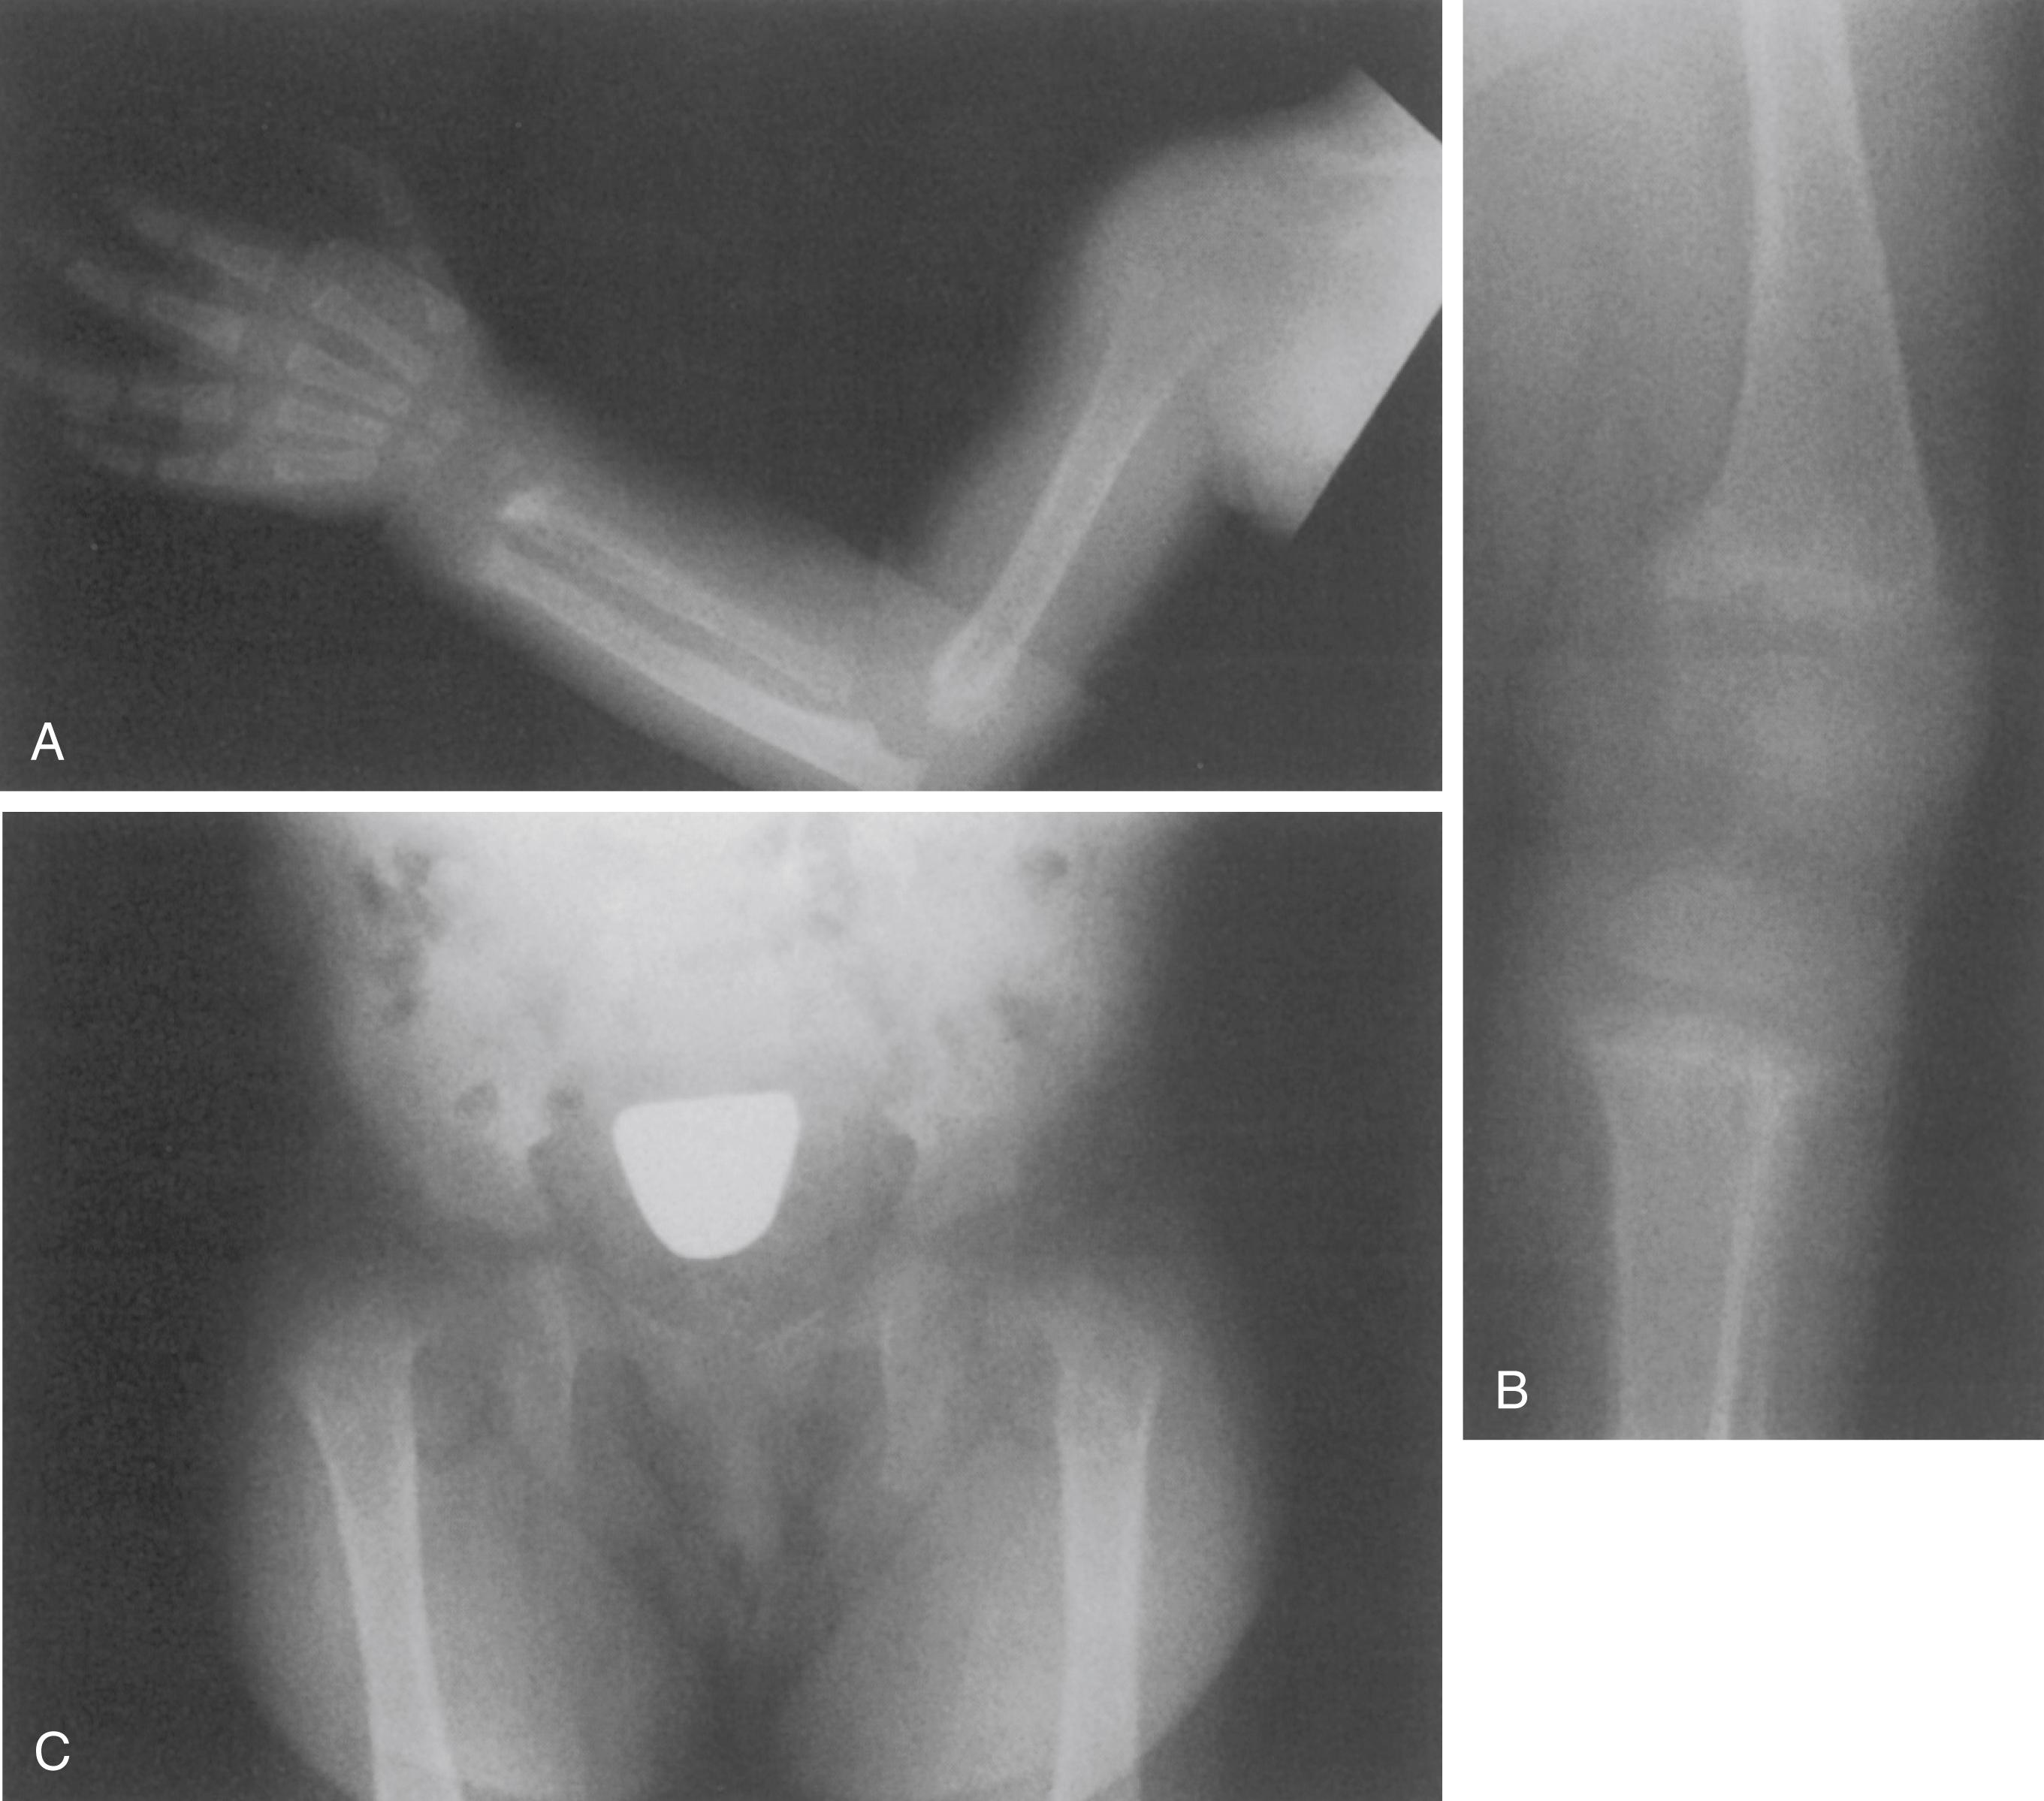 FIG. 38.3, Radiographs obtained in a 1-year-old black girl with nutritional rickets. (A) Forearm. (B) Knee. (C) Pelvis. All physes are widened and the metaphyses are indistinct. Cupping is most prominent in the metaphysis of the distal radius and ulna and at the knee. See also Fig. 38.6 .